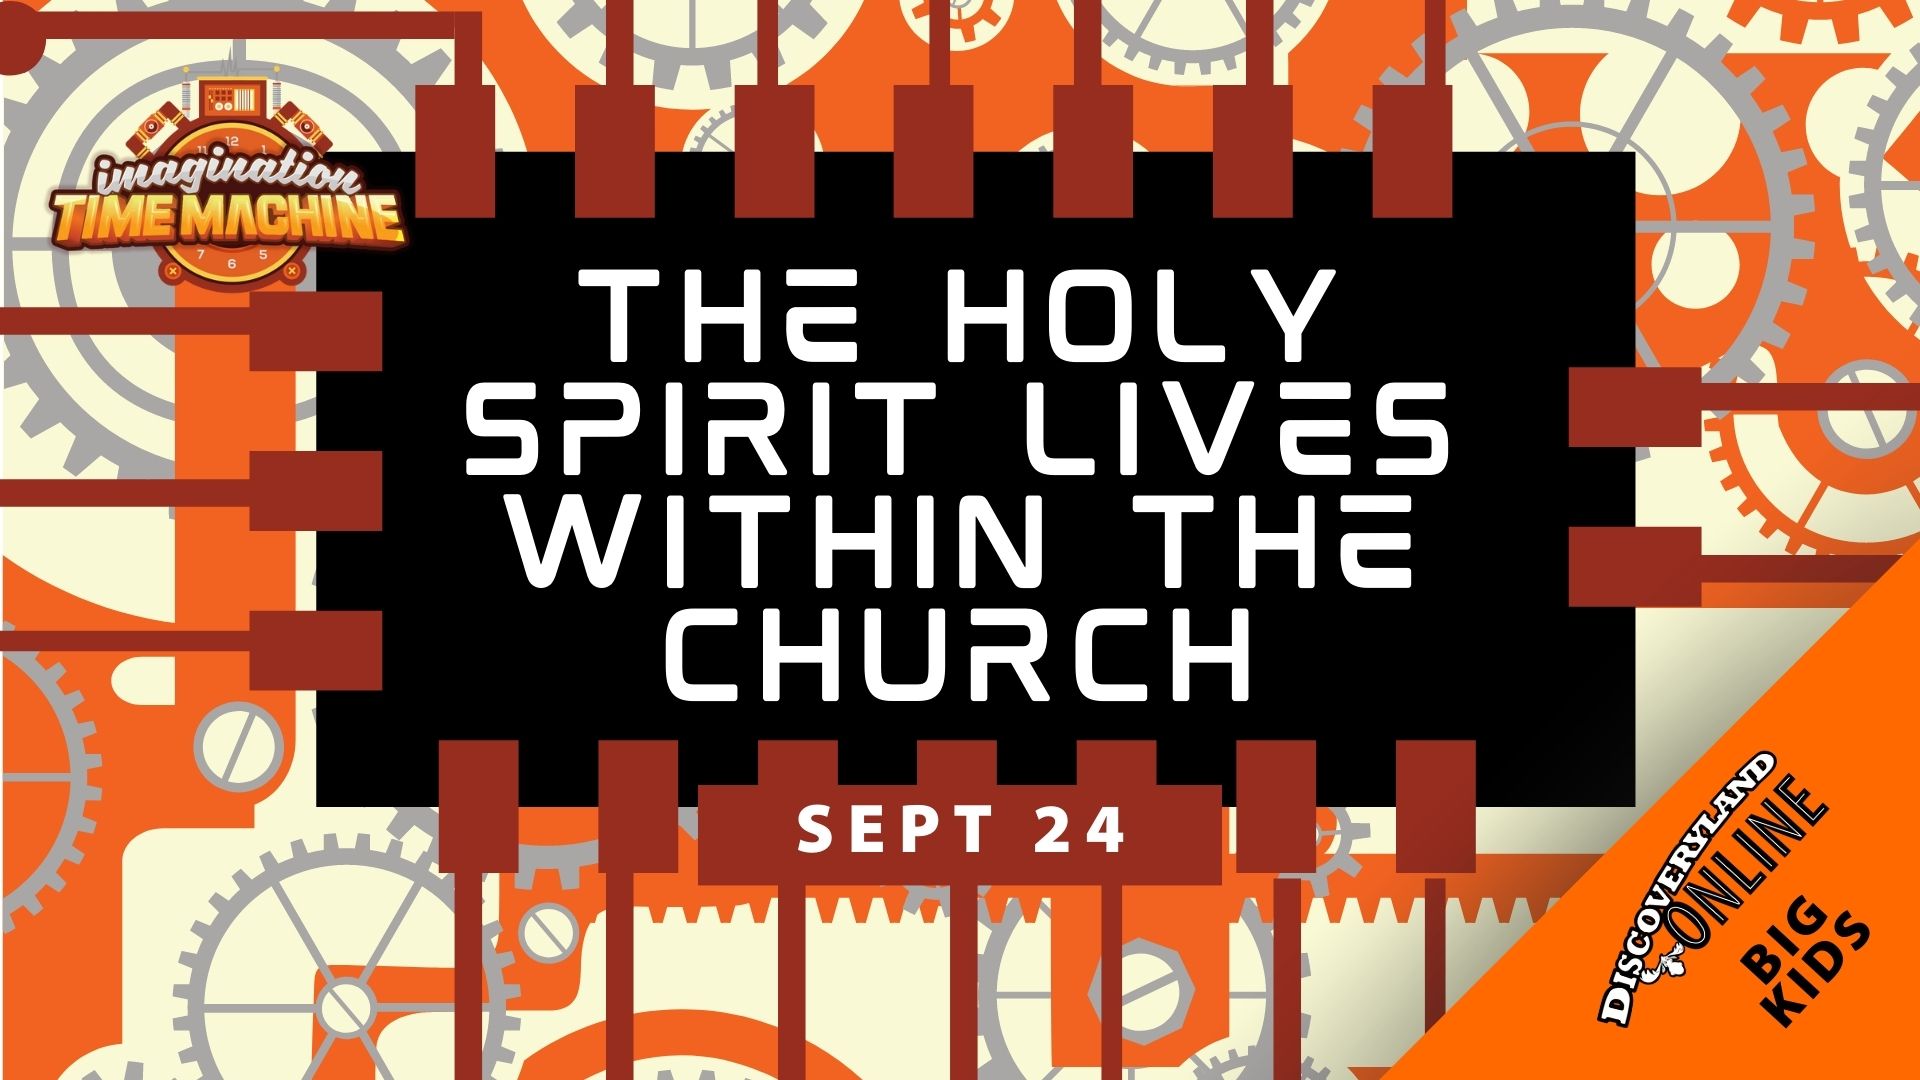 The Holy Spirit Lives Within The Church